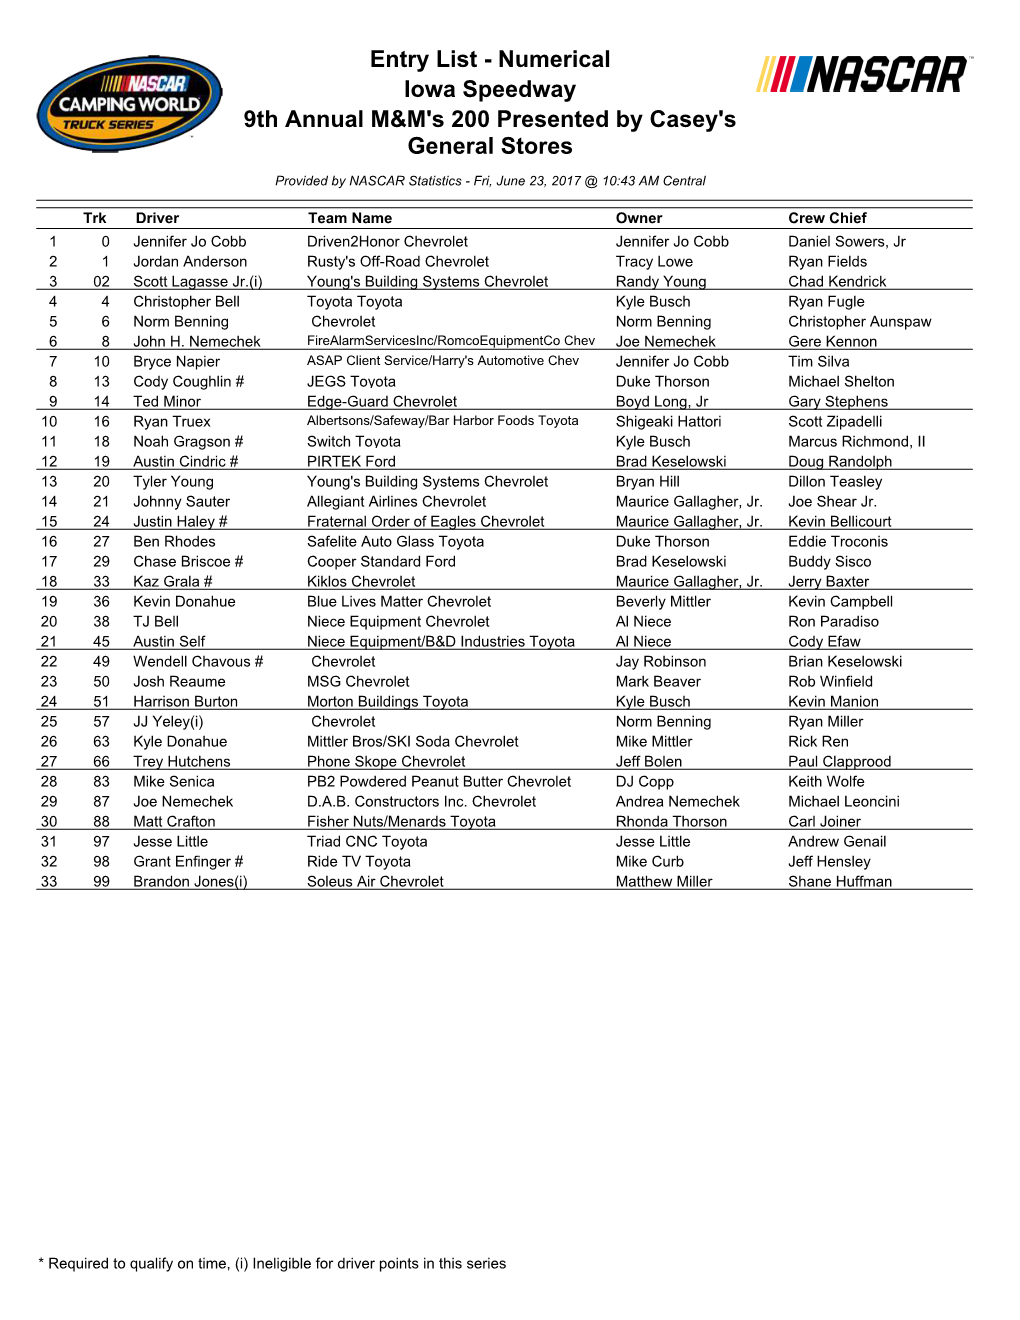 Entry List - Numerical Iowa Speedway 9Th Annual M&M's 200 Presented by Casey's General Stores